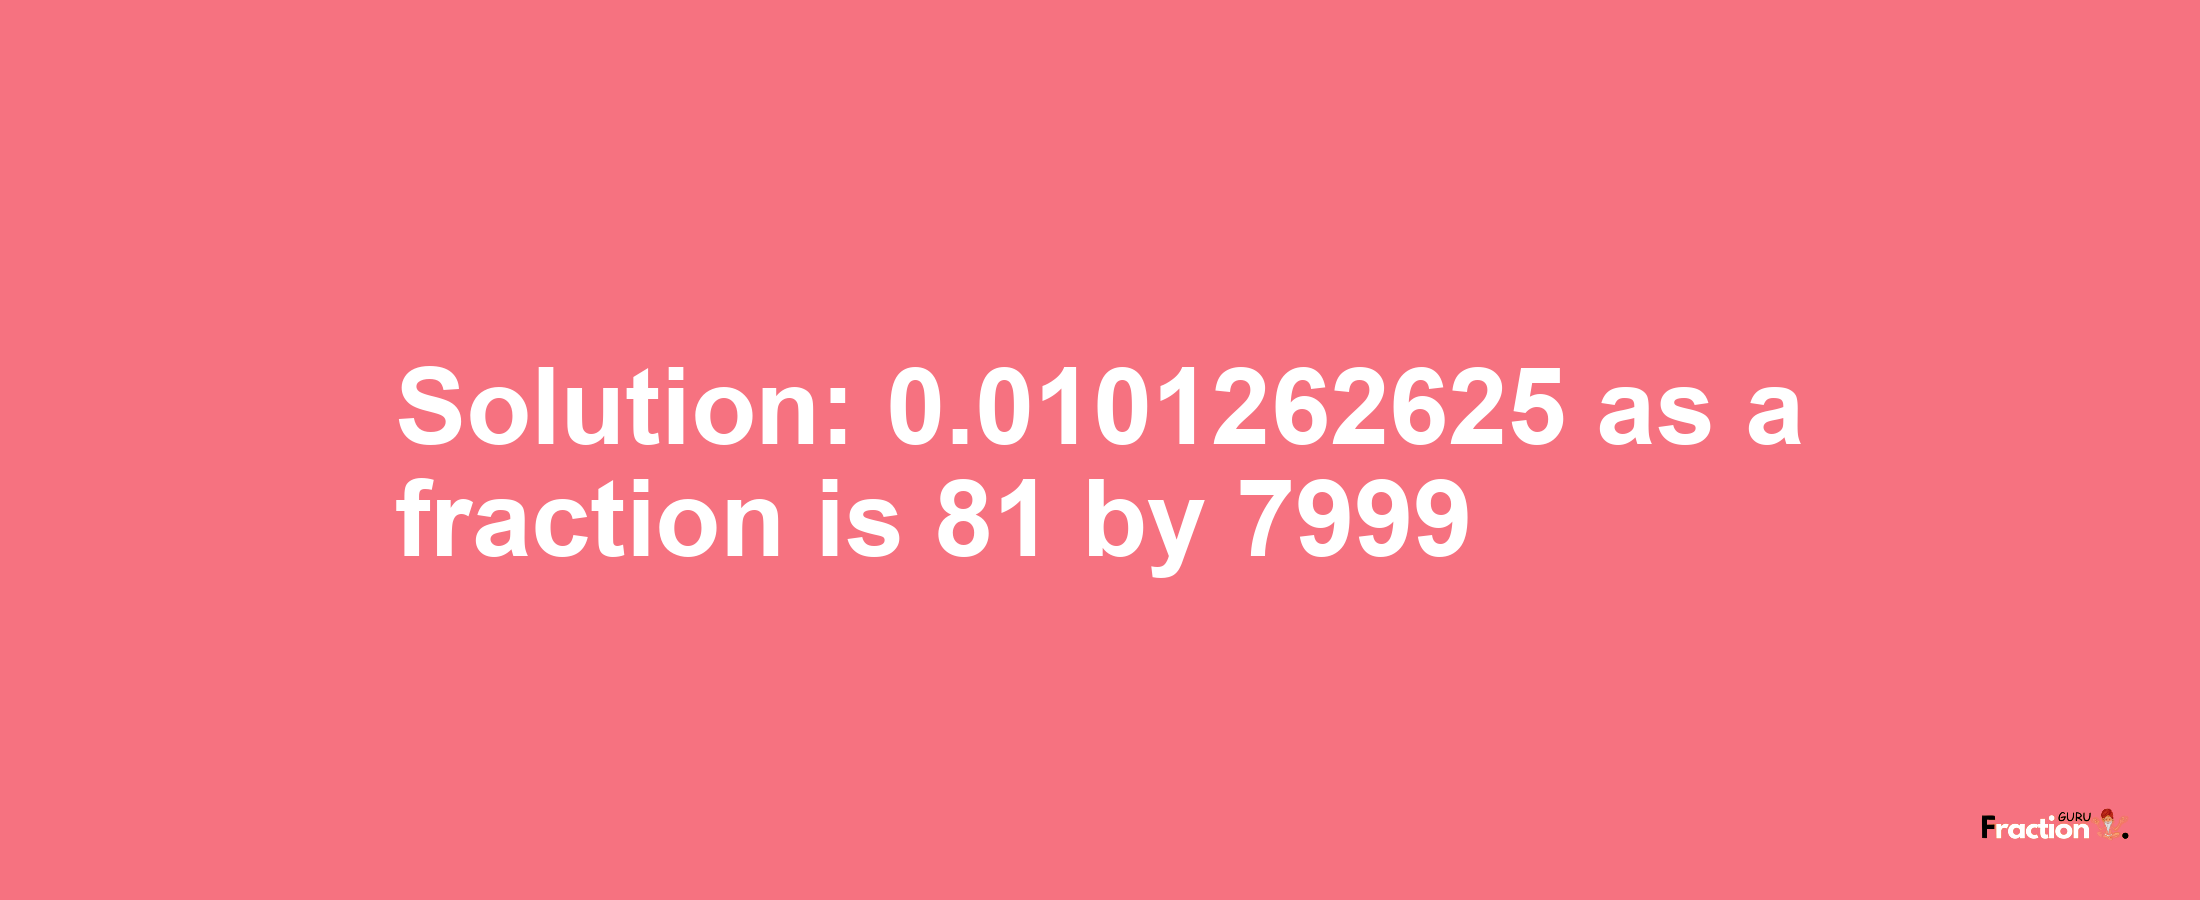 Solution:0.0101262625 as a fraction is 81/7999